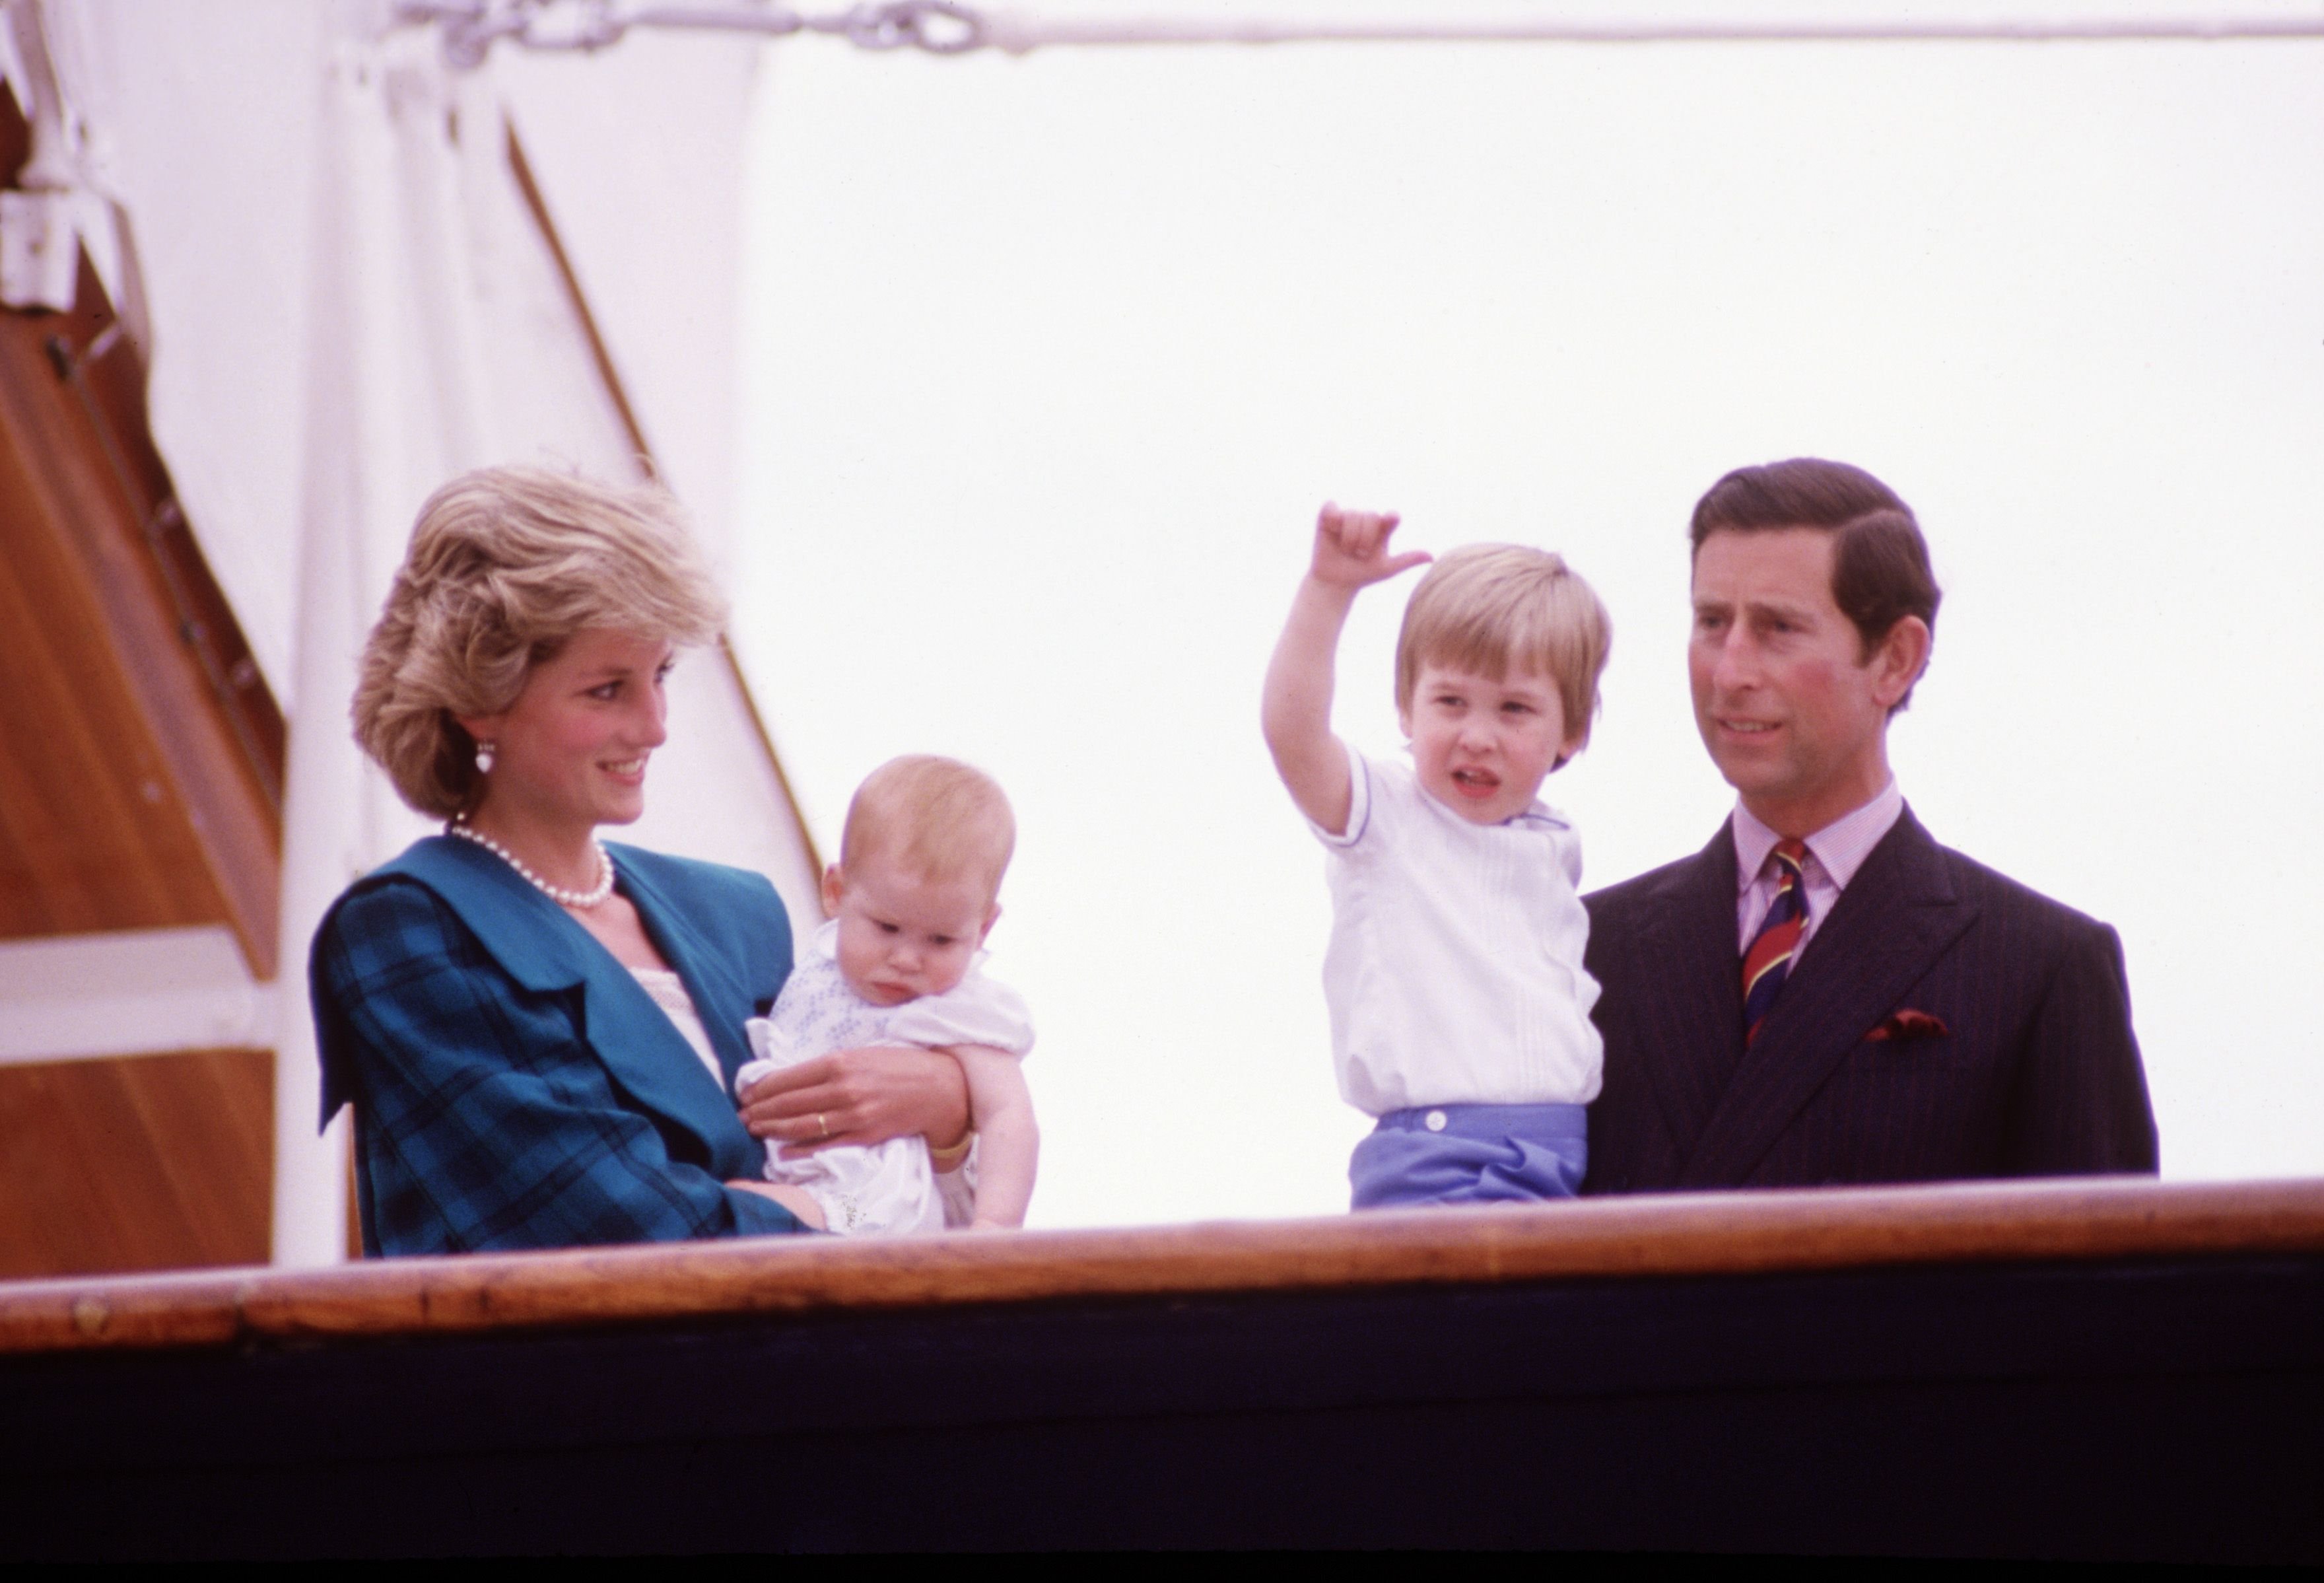 Princess Diana and Prince Charles holding sons Prince Harry and Prince William on the deck of the Royal Yacht Britannia, during the Royal Tour of Italy on May 5, 1985, in Venice, Italy | Photo: David Levenson/Getty Images